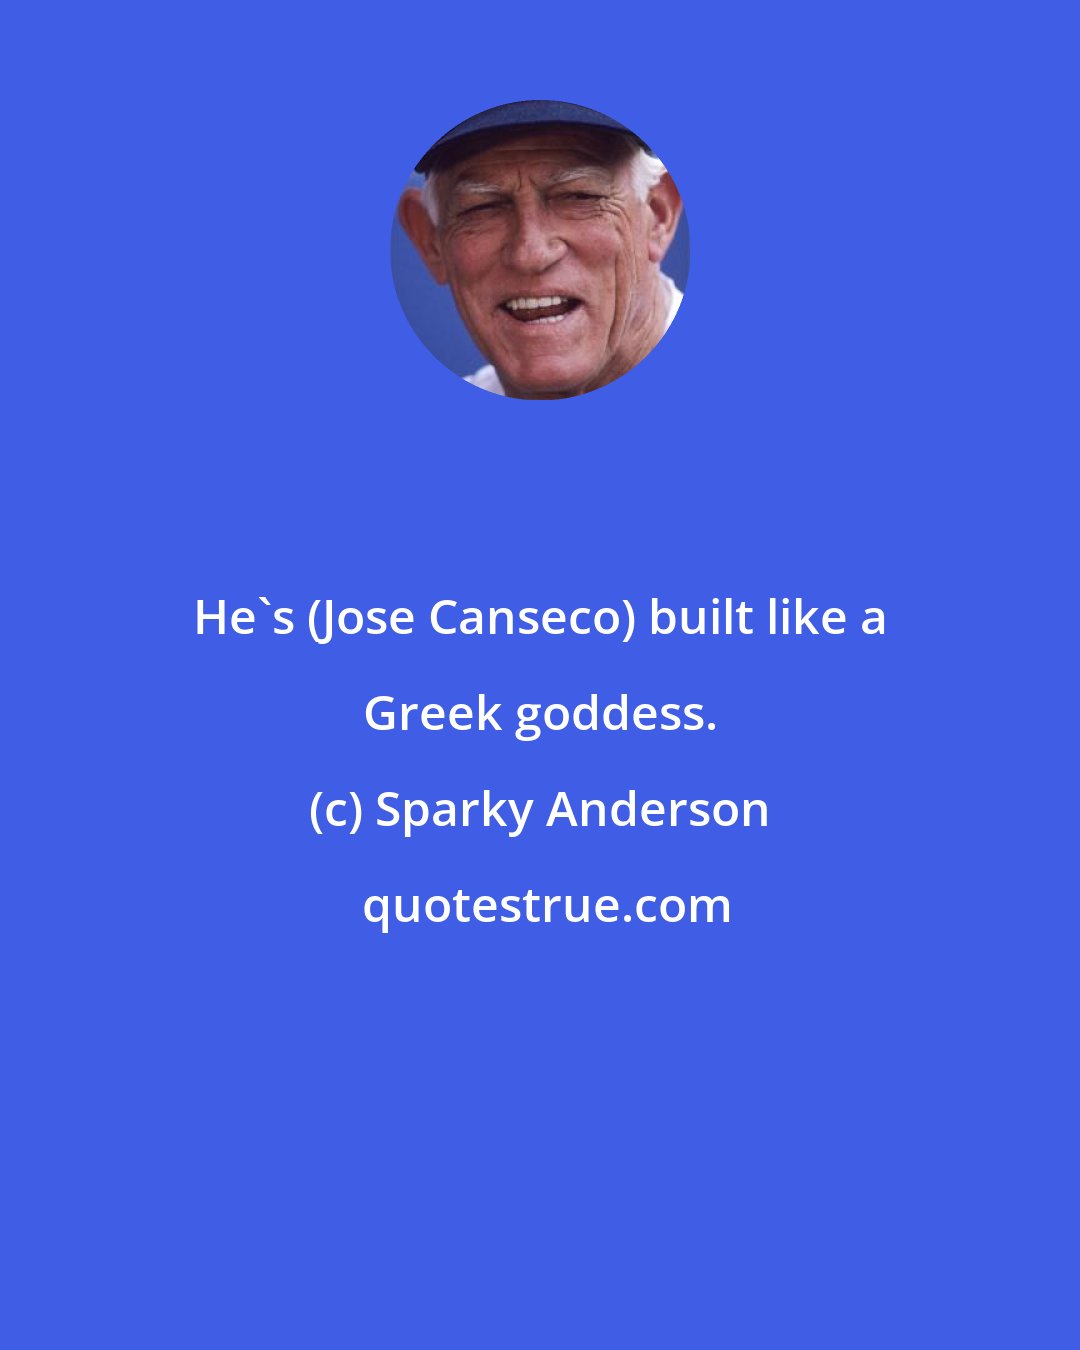 Sparky Anderson: He's (Jose Canseco) built like a Greek goddess.